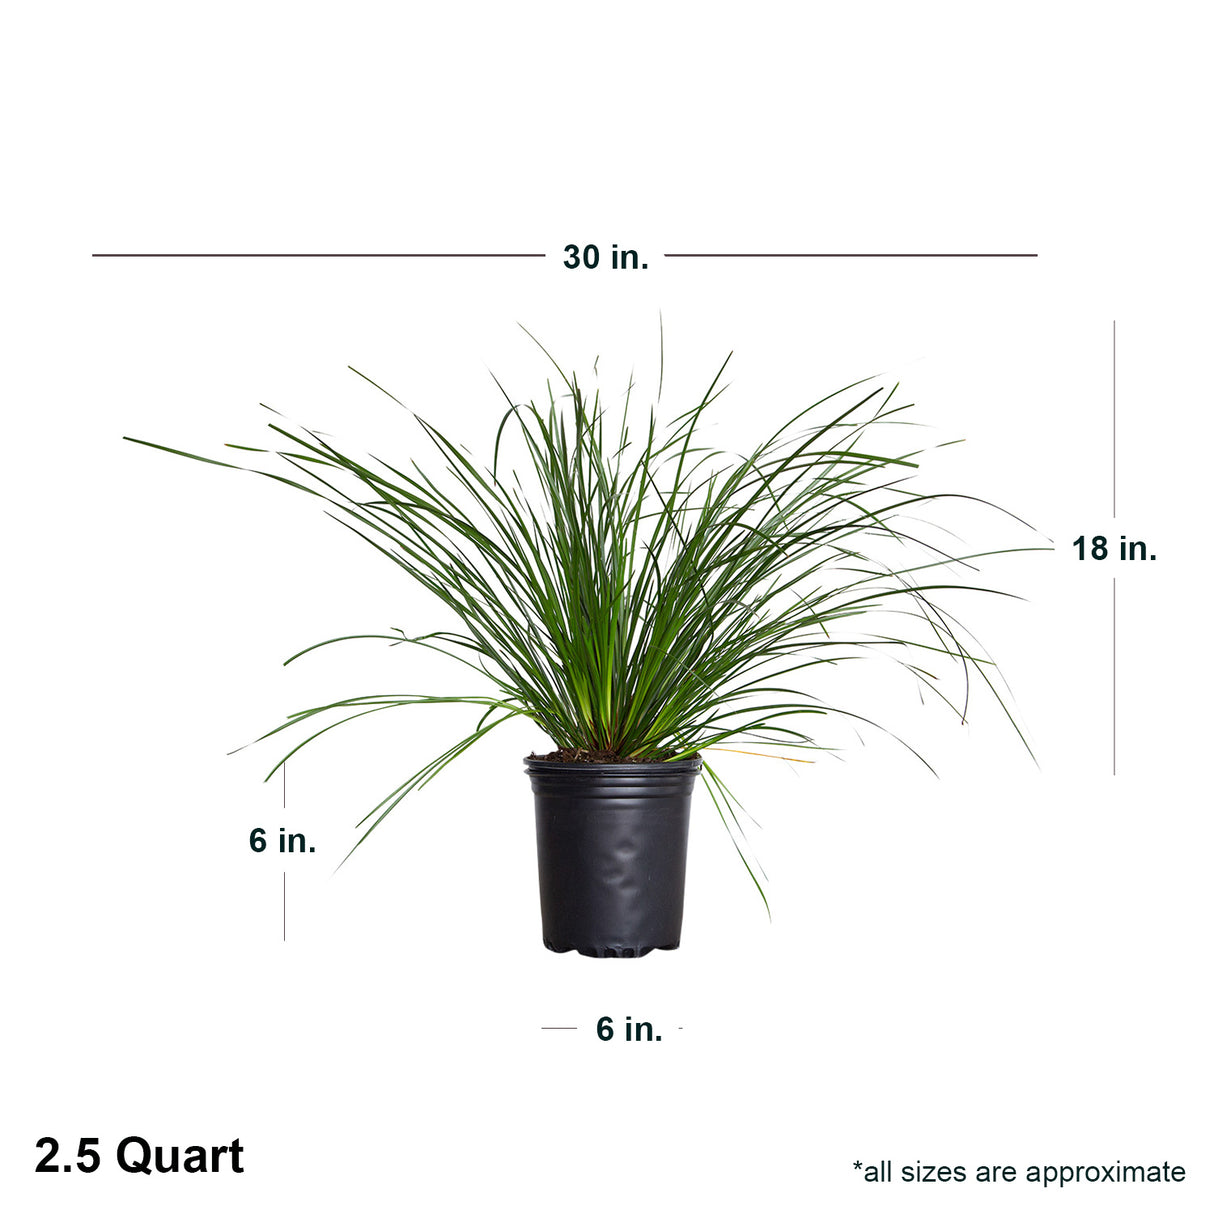 2.5 Quart Breeze lomandra long strap like foliage in a black pot with average shipped dimensions. Ships approx 18 inches tall by 25-30 inches wide